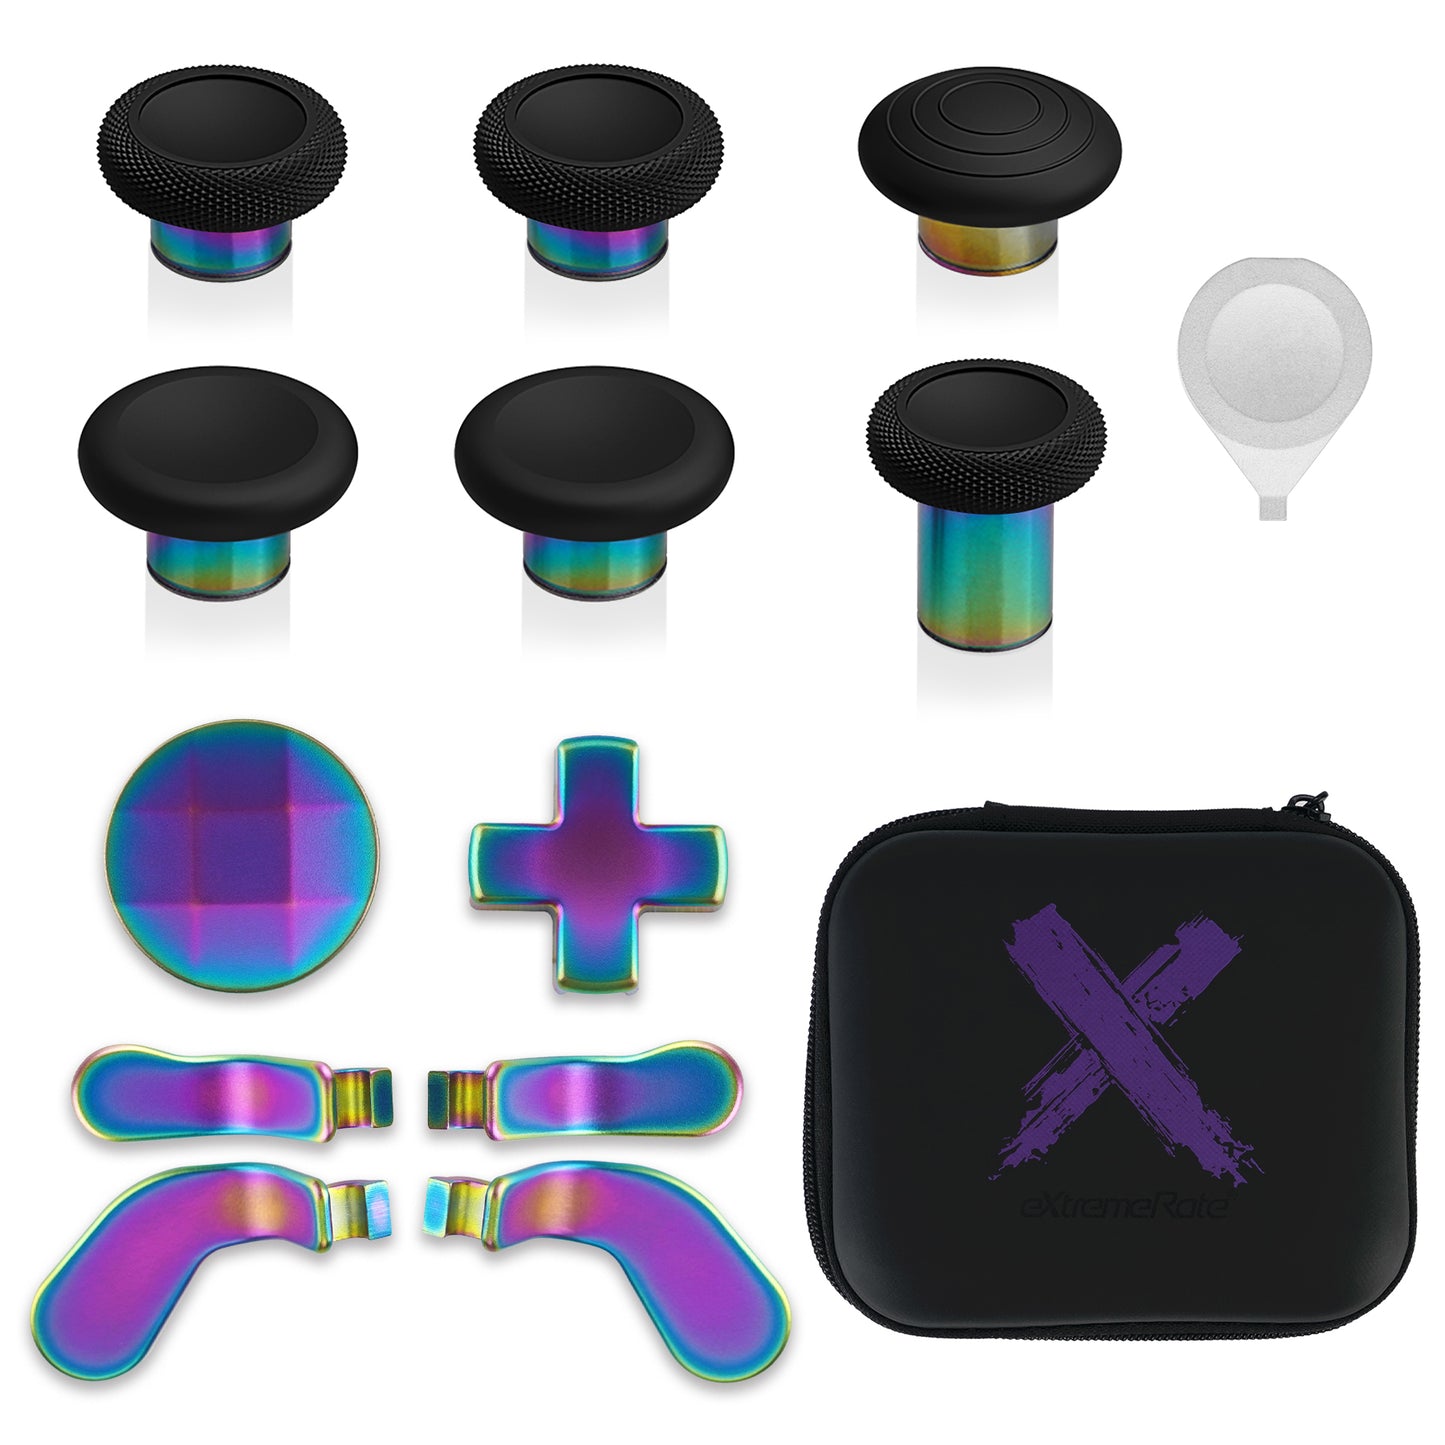 eXtremeRate 13 in 1 Component Pack Kit Replacement Metal Thumbsticks & D-Pads & Paddles for Xbox Elite Series 2 & Elite 2 Core Controller (Model 1797) - Metallic Rainbow Aura Blue & Purple eXtremeRate